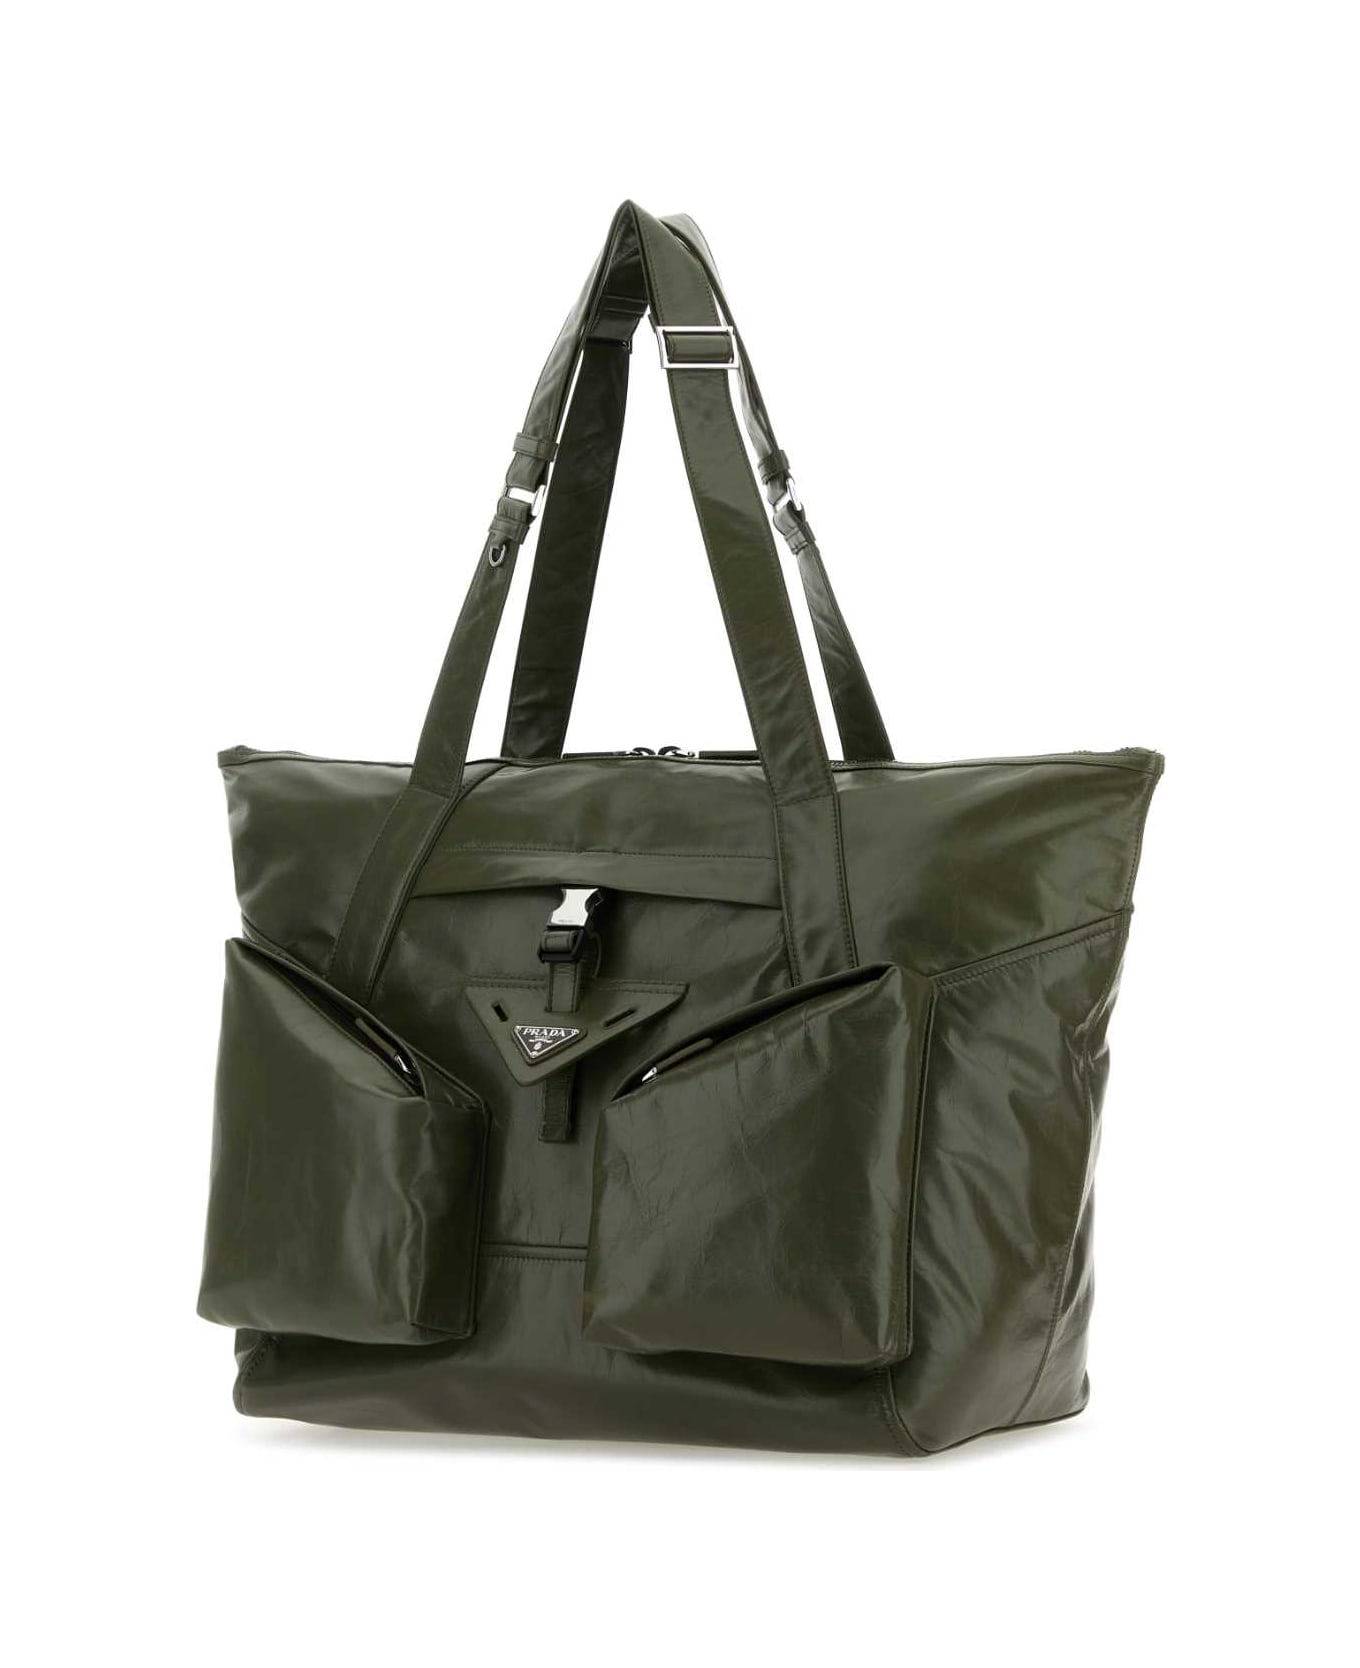 Prada Olive Green Leather Shopping Bag - LODEN トートバッグ